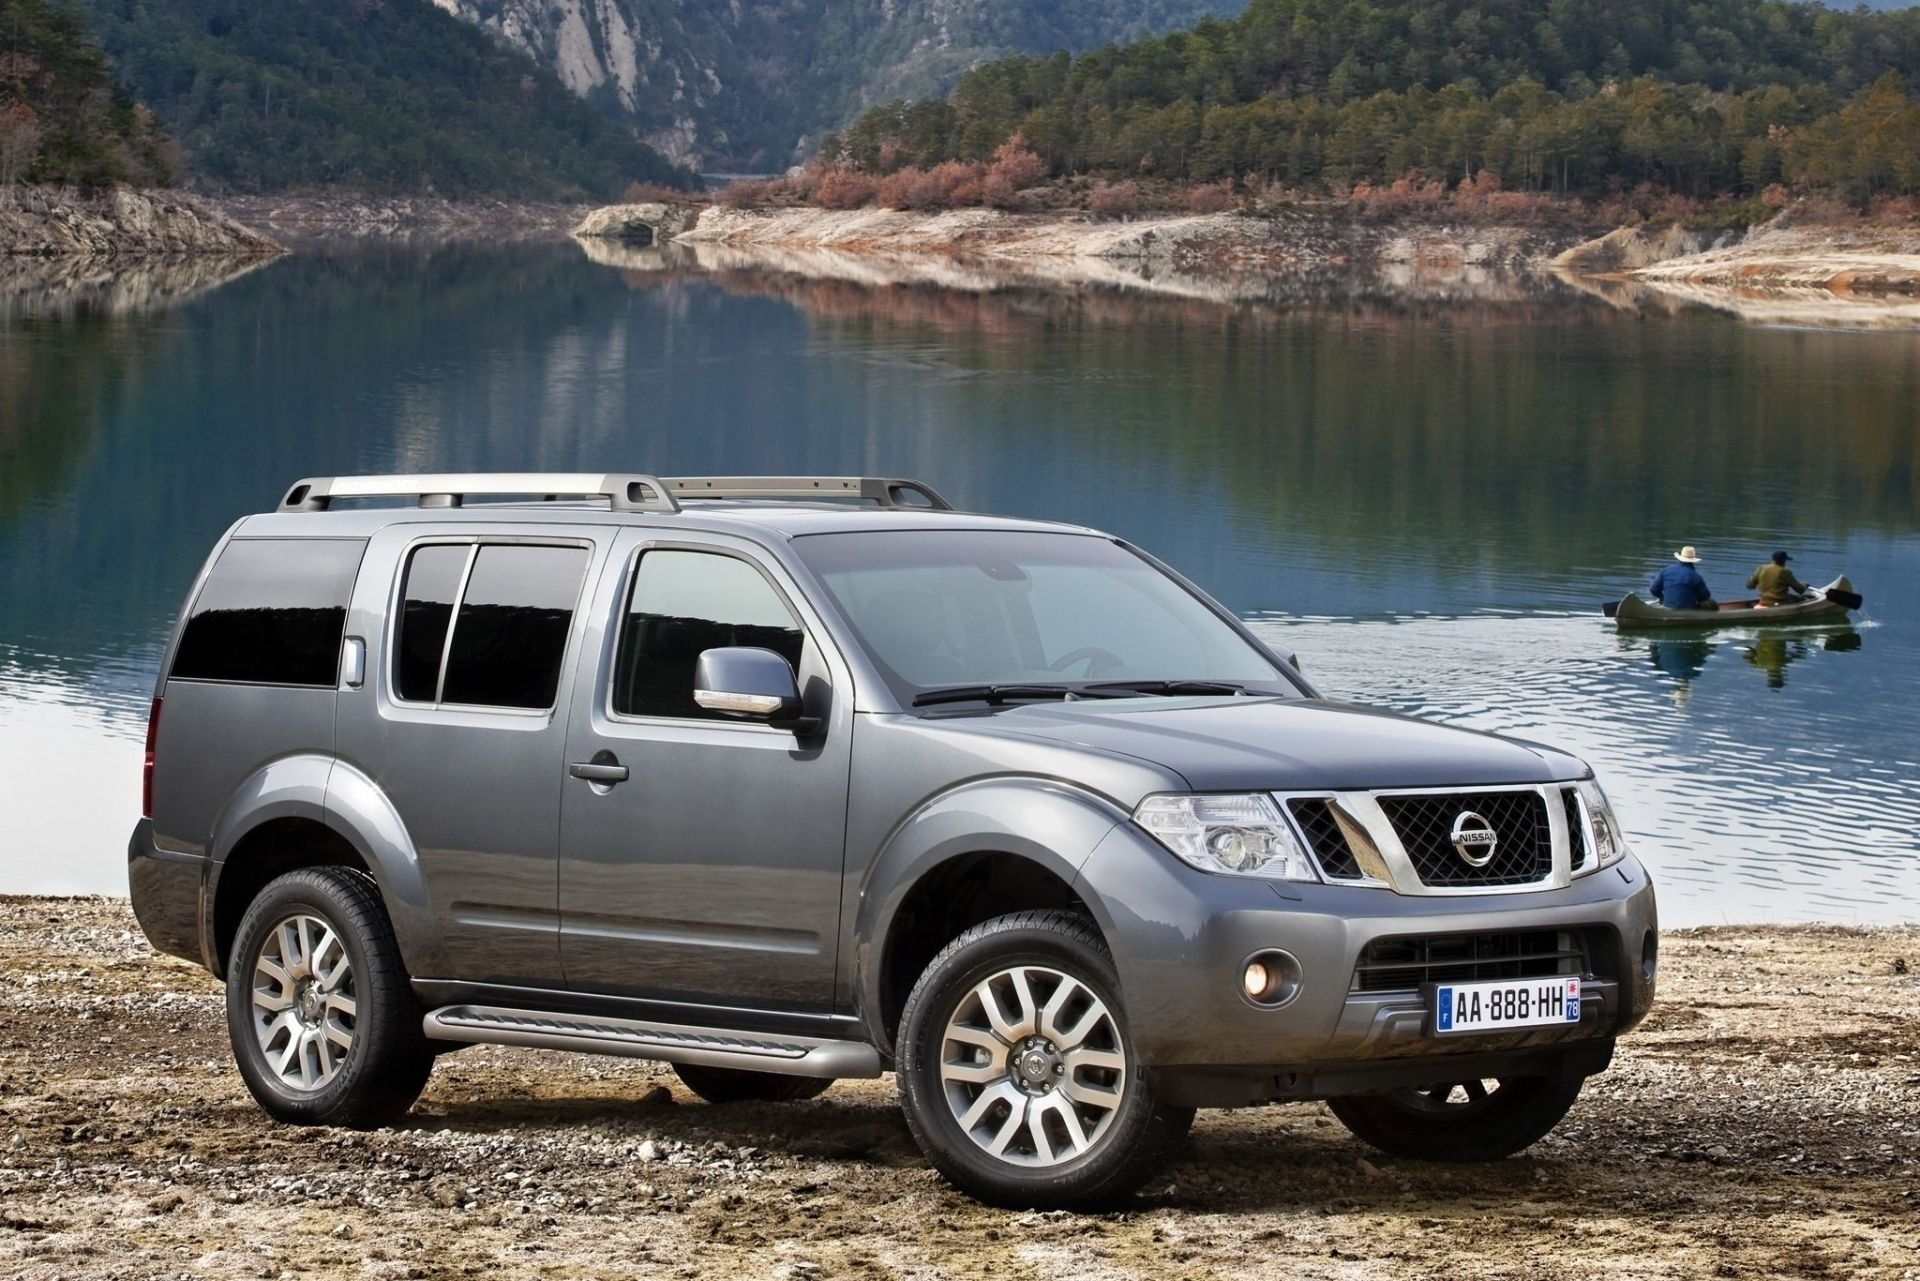 Trail-Tested Toughness: Deciphering the Off-Road Capabilities of the Nissan Pathfinder